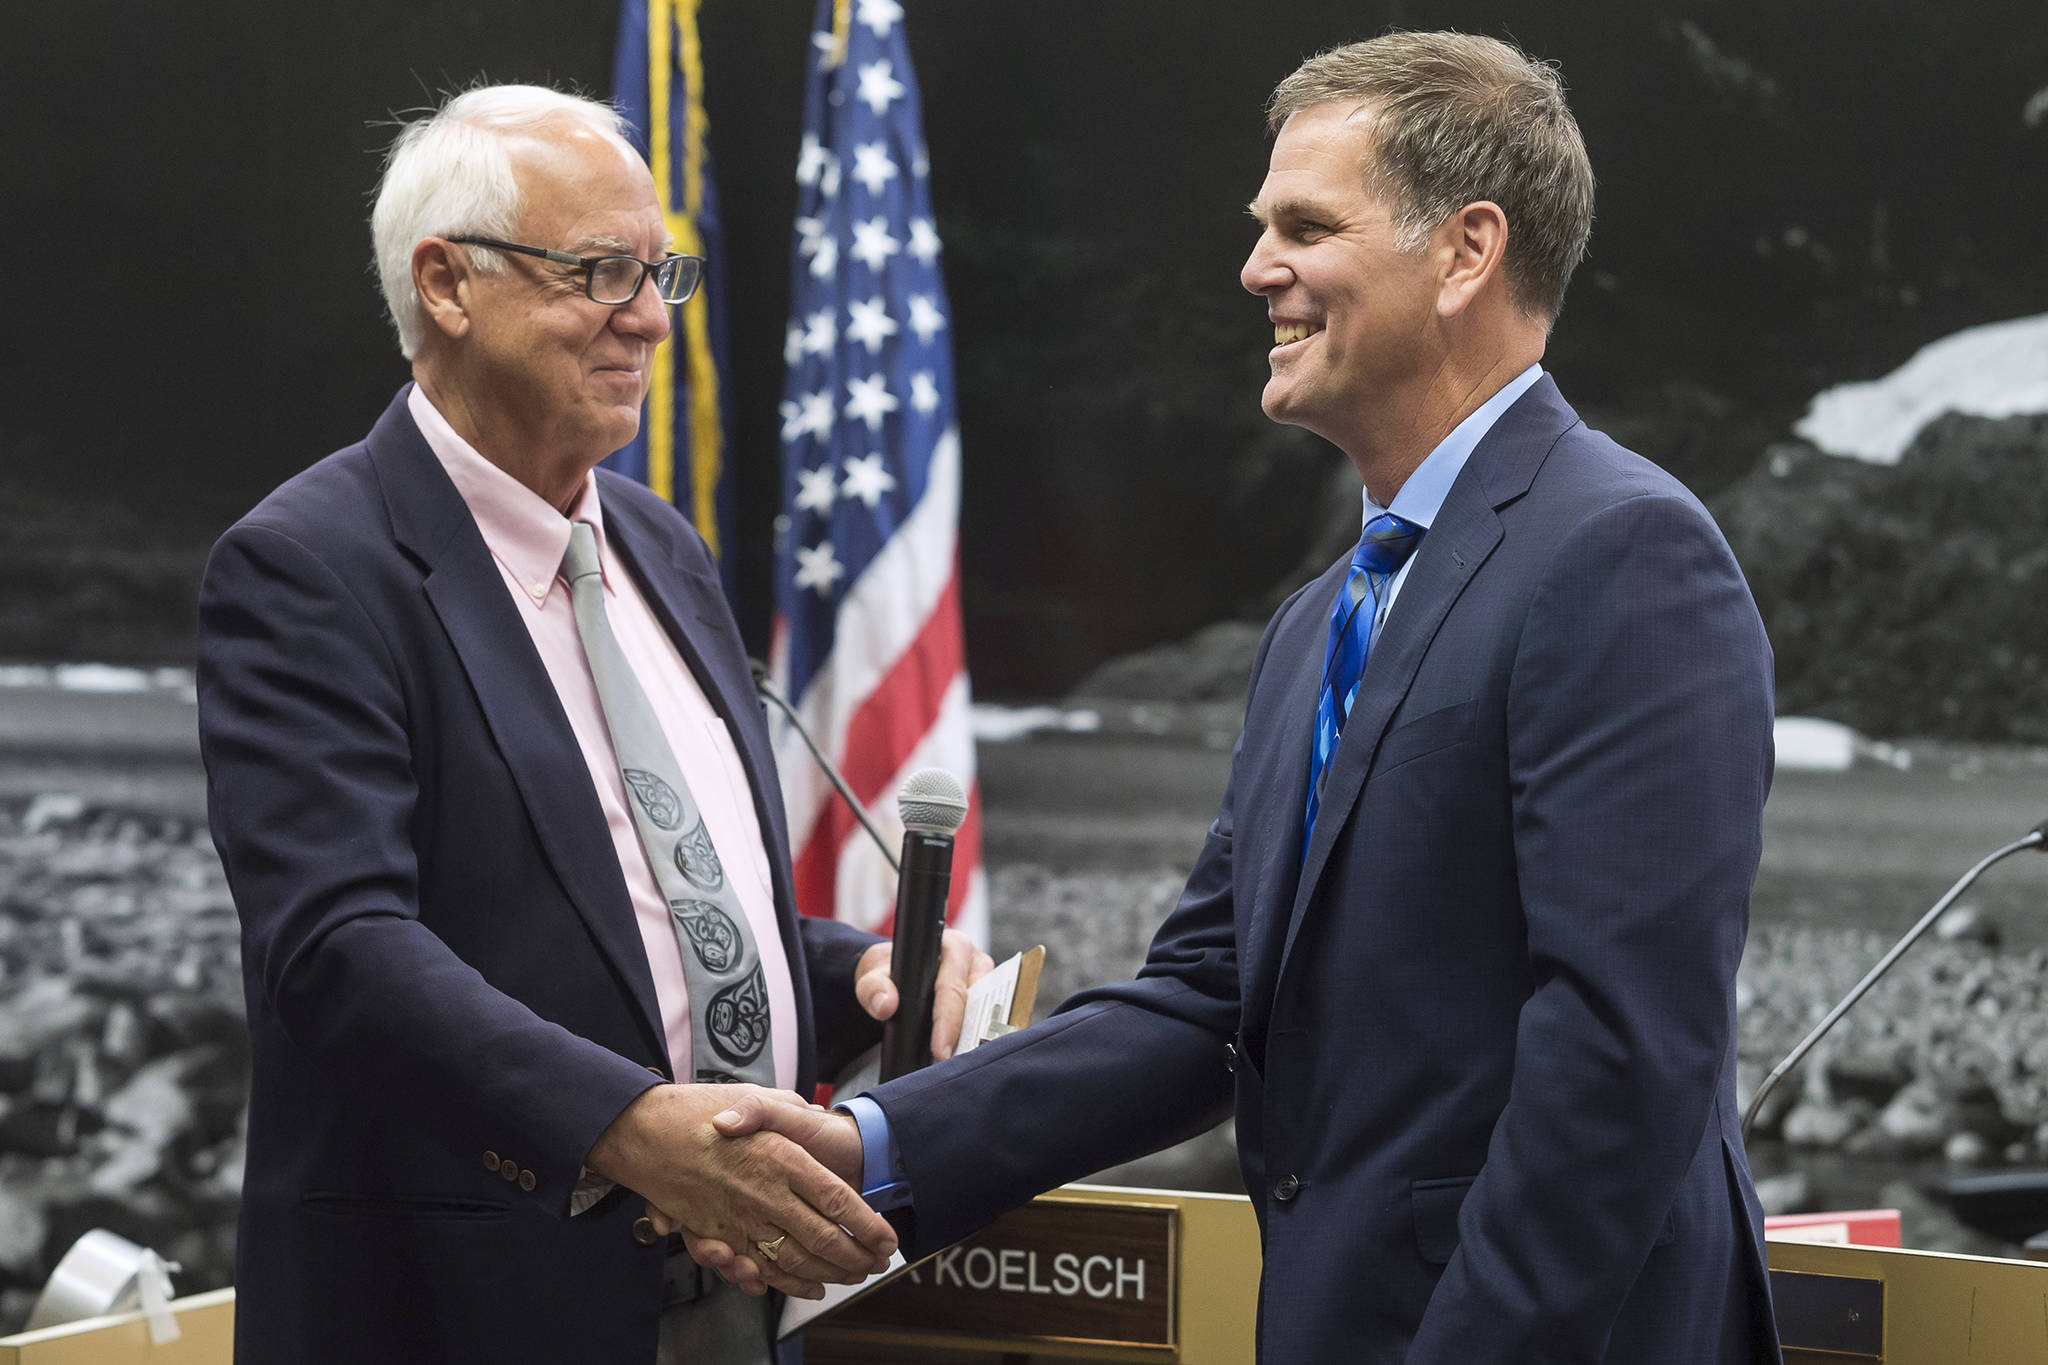 Outgoing Mayor Ken Koelsch, left, thanks Assembly member Jerry Nankervis for his service in the Assembly chambers on Monday, Oct. 15, 2018. (Michael Penn | Juneau Empire)